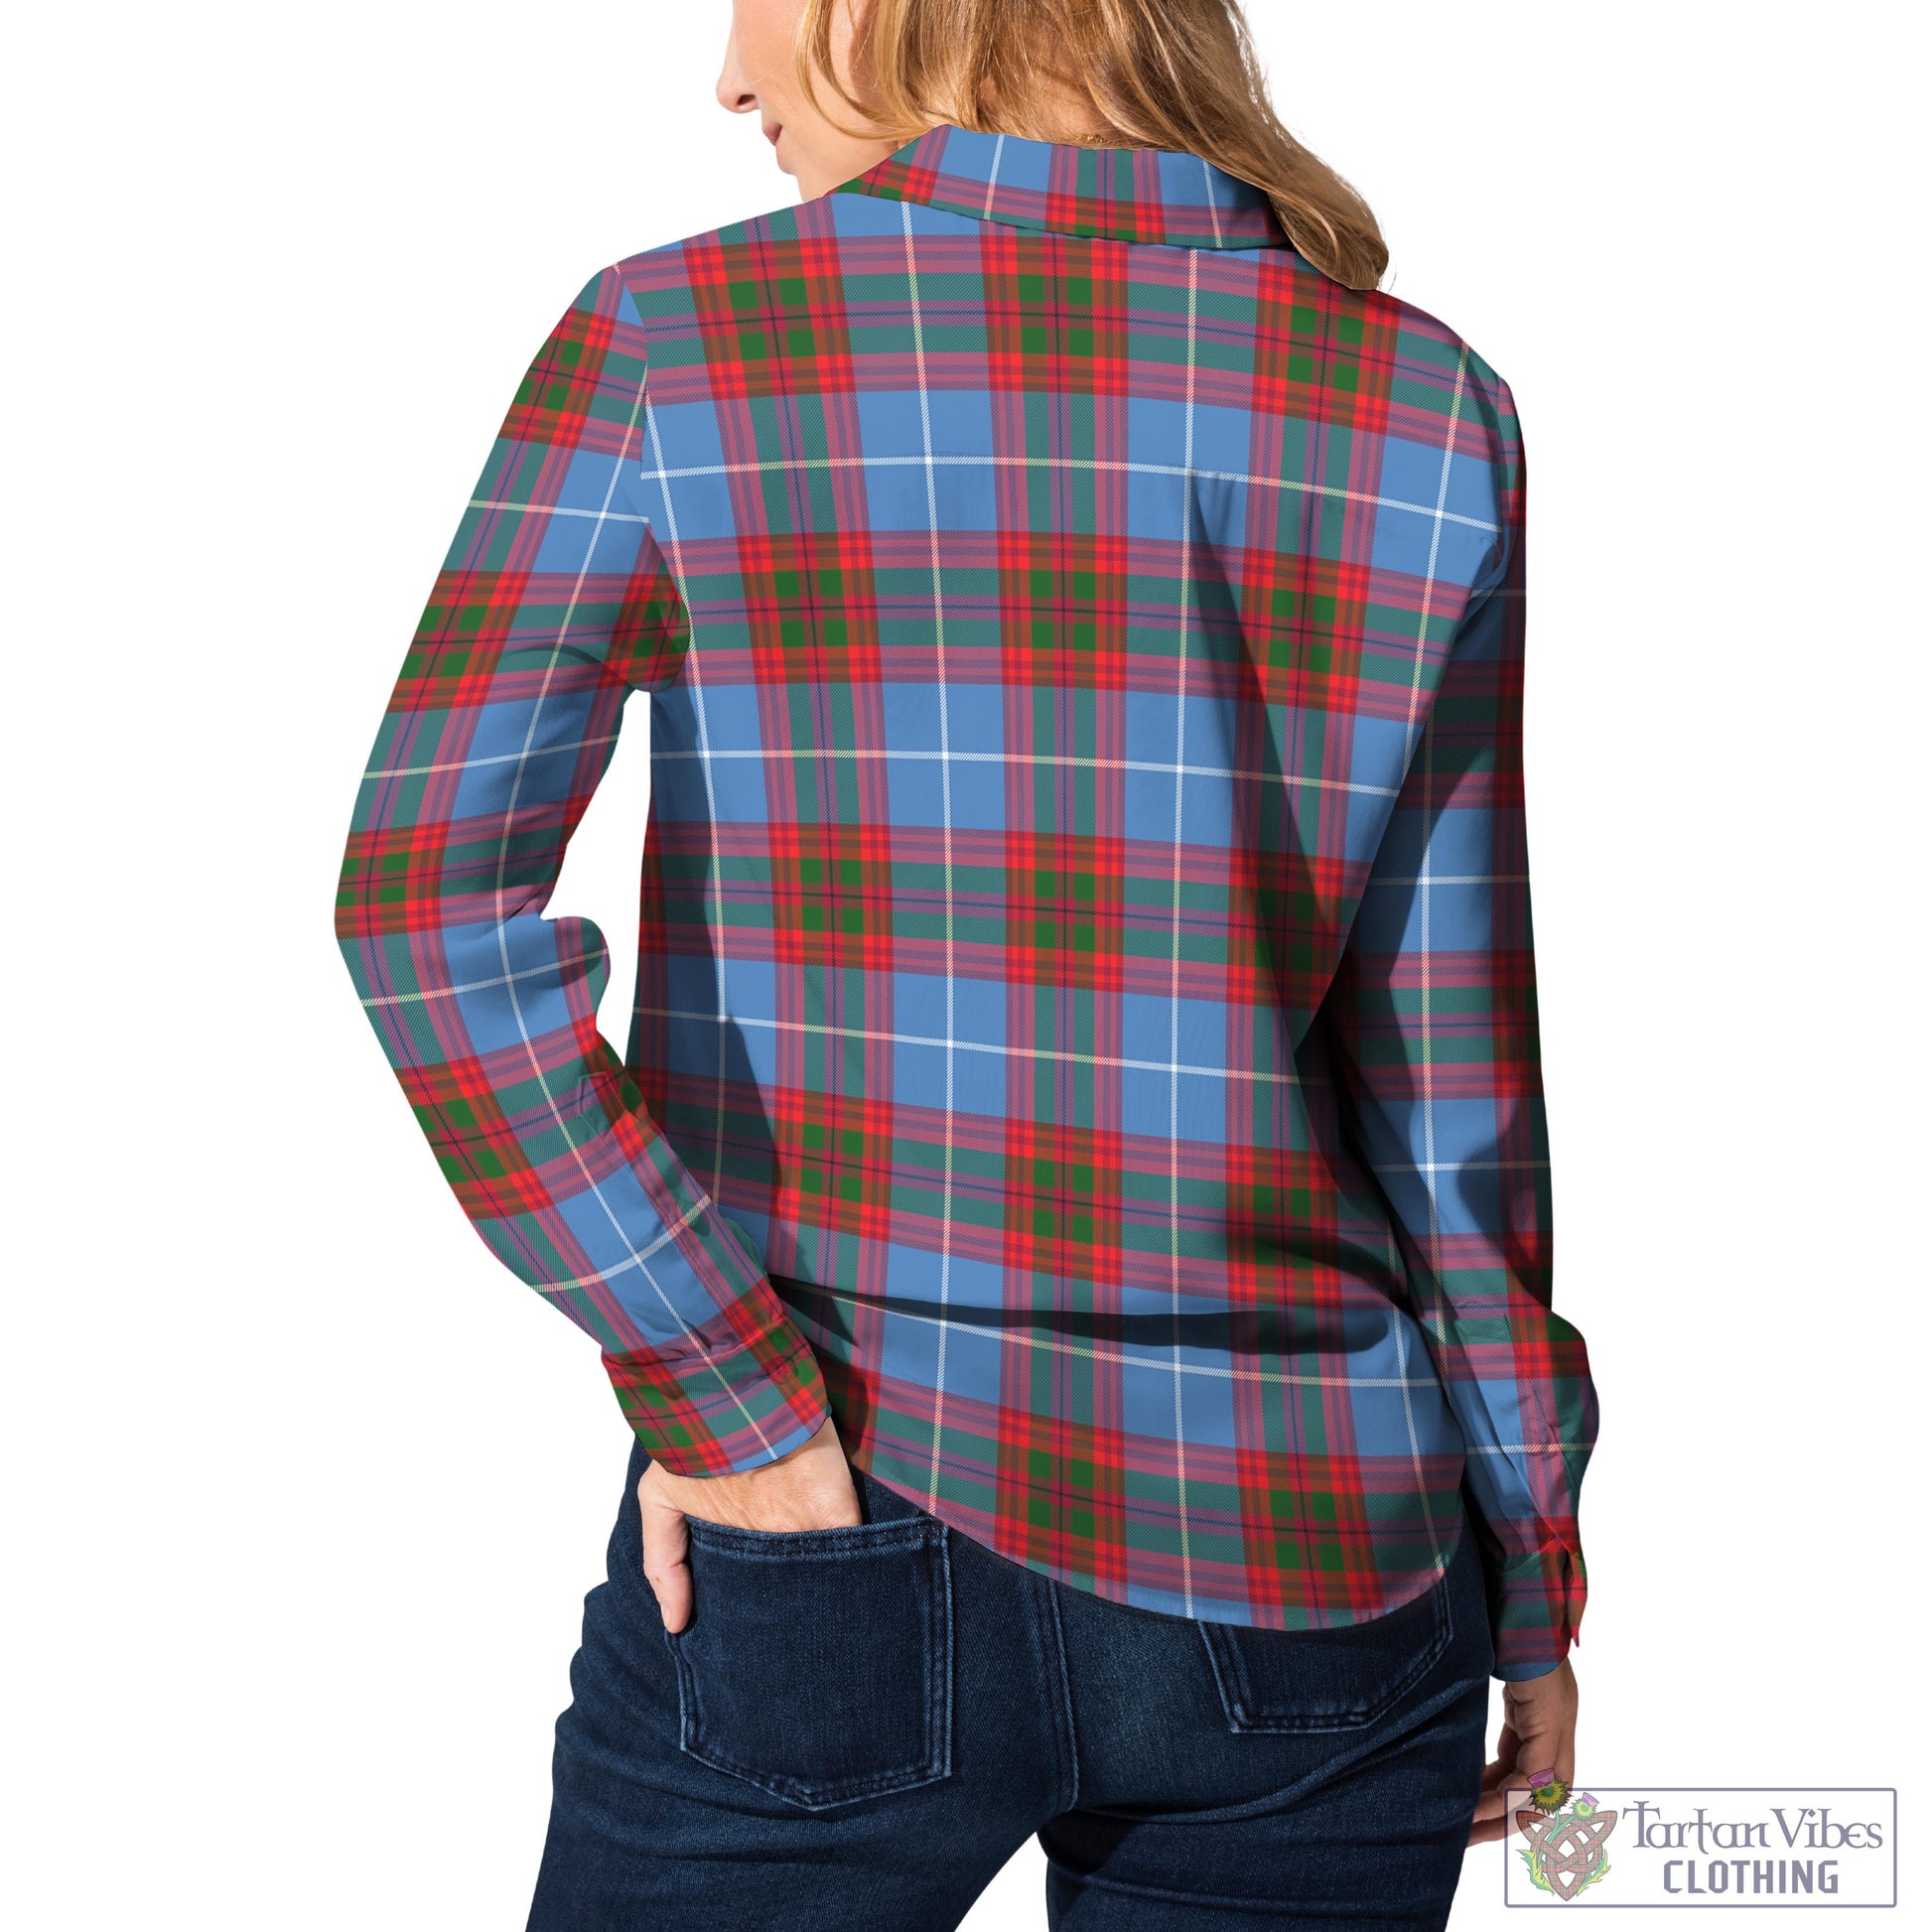 Tartan Vibes Clothing Trotter Tartan Womens Casual Shirt with Family Crest